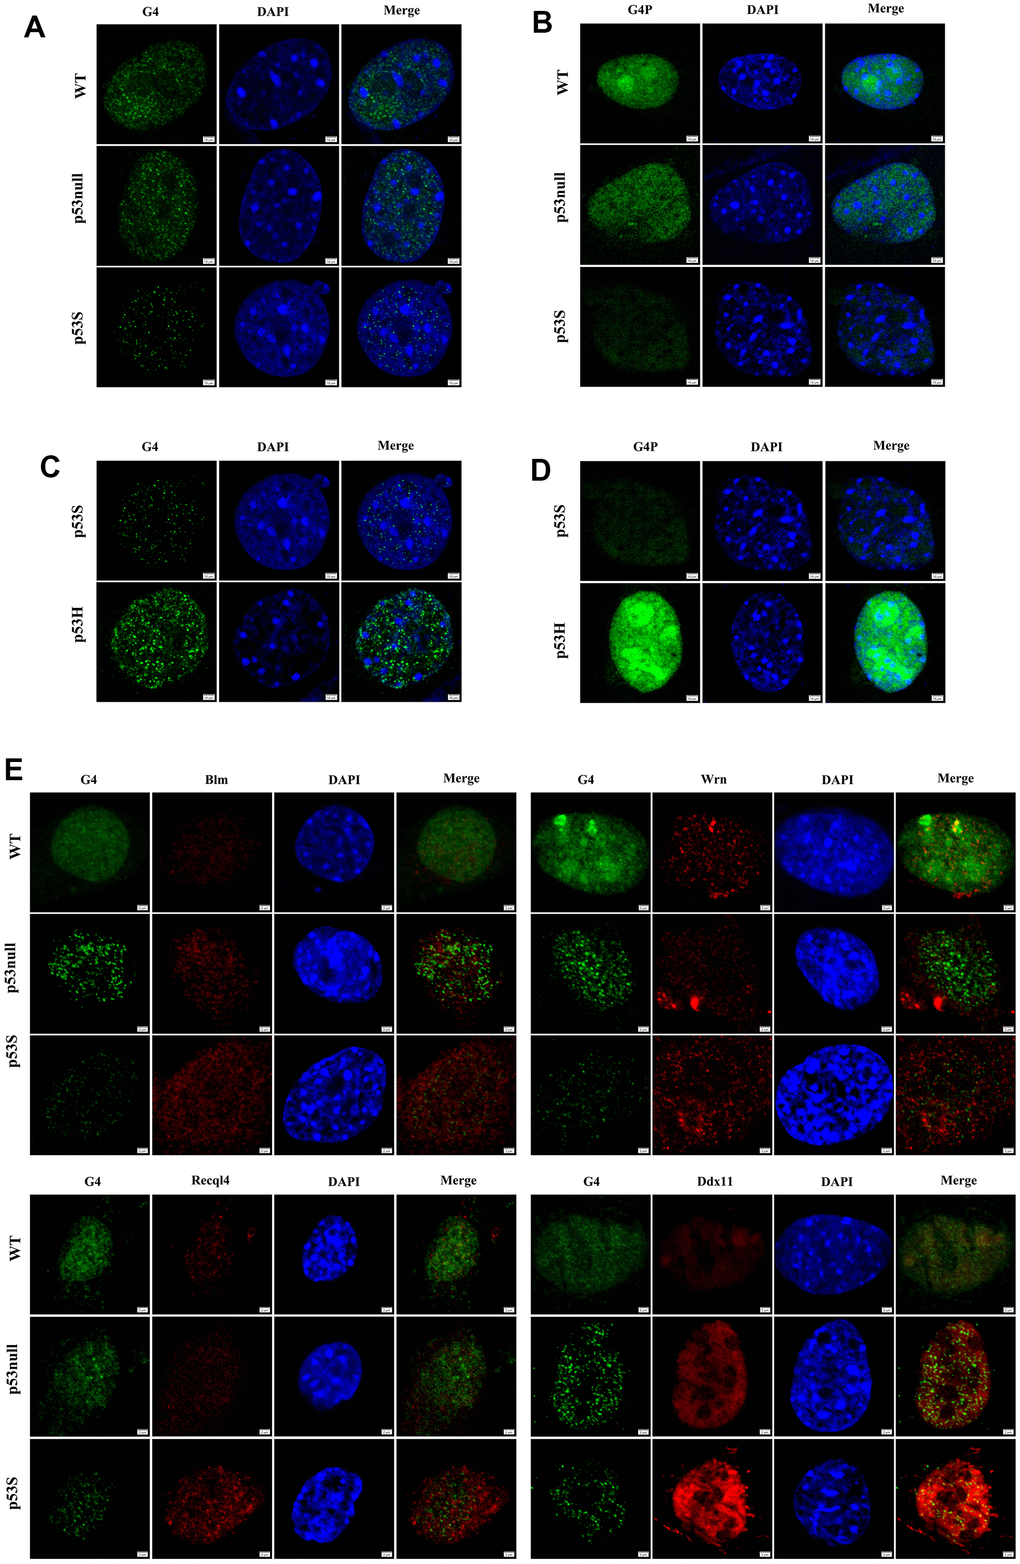 The p53S reduced the presence of G4 structure by promoting the DNA helicase expression and colocalization with G4. (A) Detected by immunofluorescence with G4 antibody, the presence of G4 structure decreased in p53S cells comparing with p53null and WT cells, suggesting a smoother unwinding of G4 structure. (B) Detected by specific G4 binding protein G4P labeled with GFP, the presence of G4 structure decreased in p53S cells comparing with p53null and WT cells. (C) The comparison of the G4 content between p53S and p53H cells by immunofluorescence with G4 antibody. (D) The comparison of the G4 content between p53S and p53H cells by specific G4 binding protein G4P. (E) The p53S promoted the expression and colocalization of DNA helicases with G4 structure.